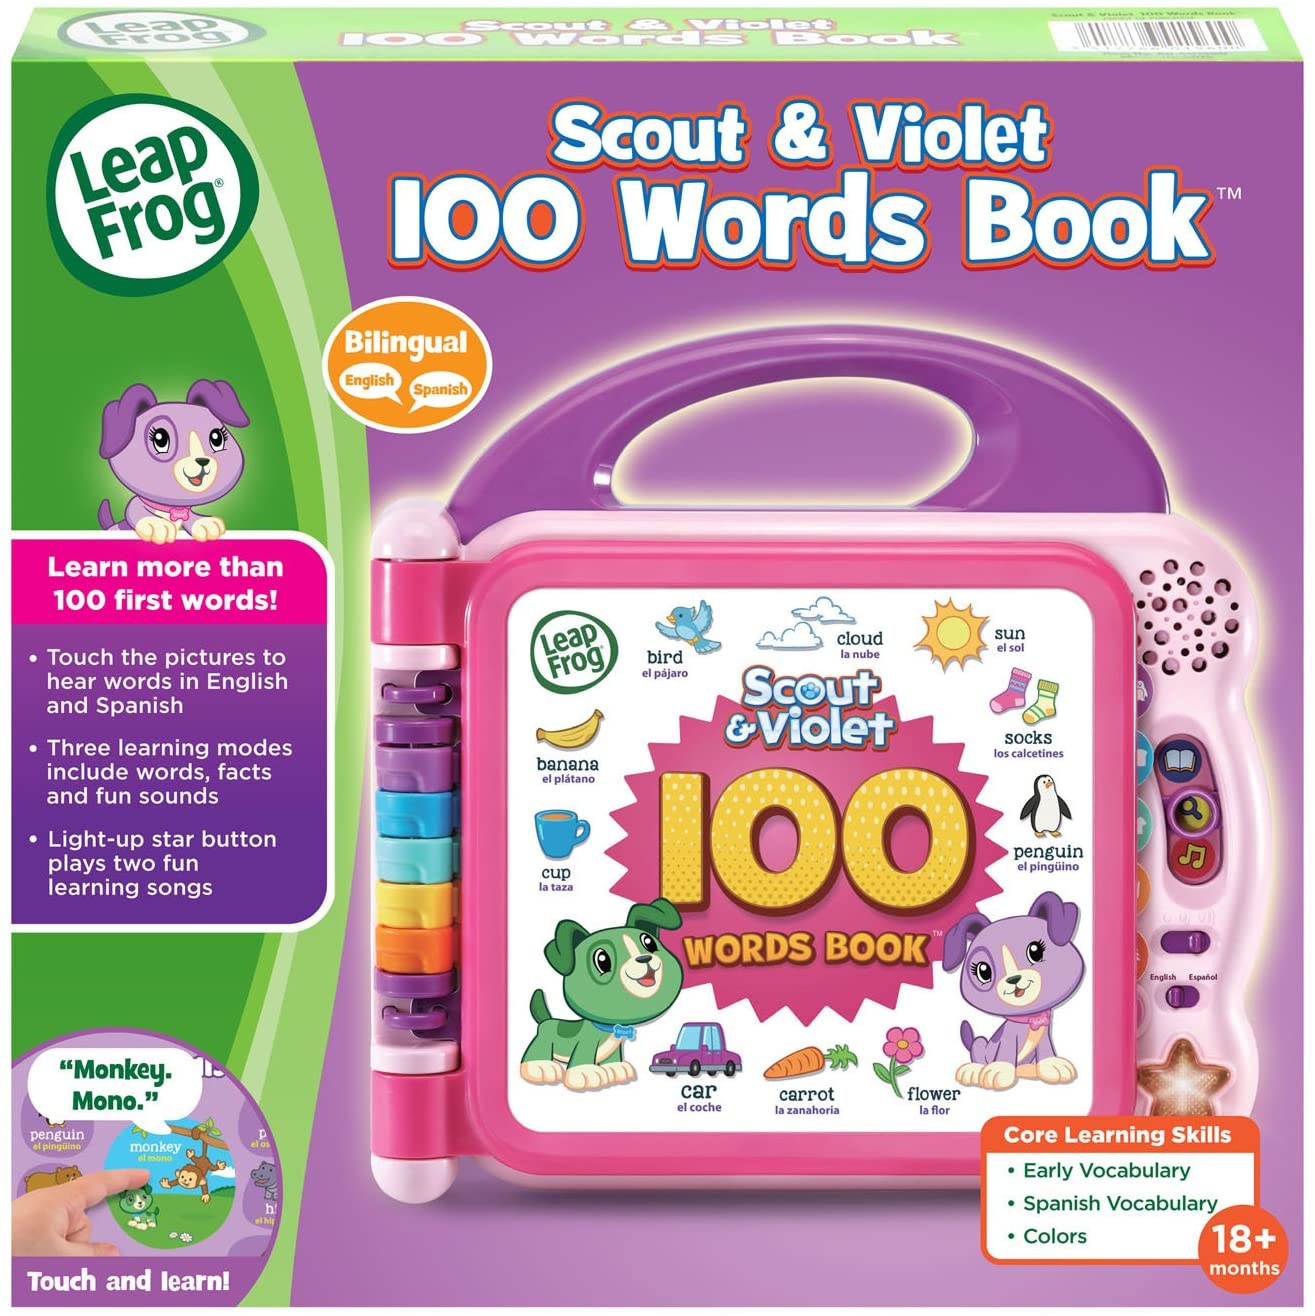 LeapFrog Scout and Violet 100 Words Boo, Purple - image 5 of 8